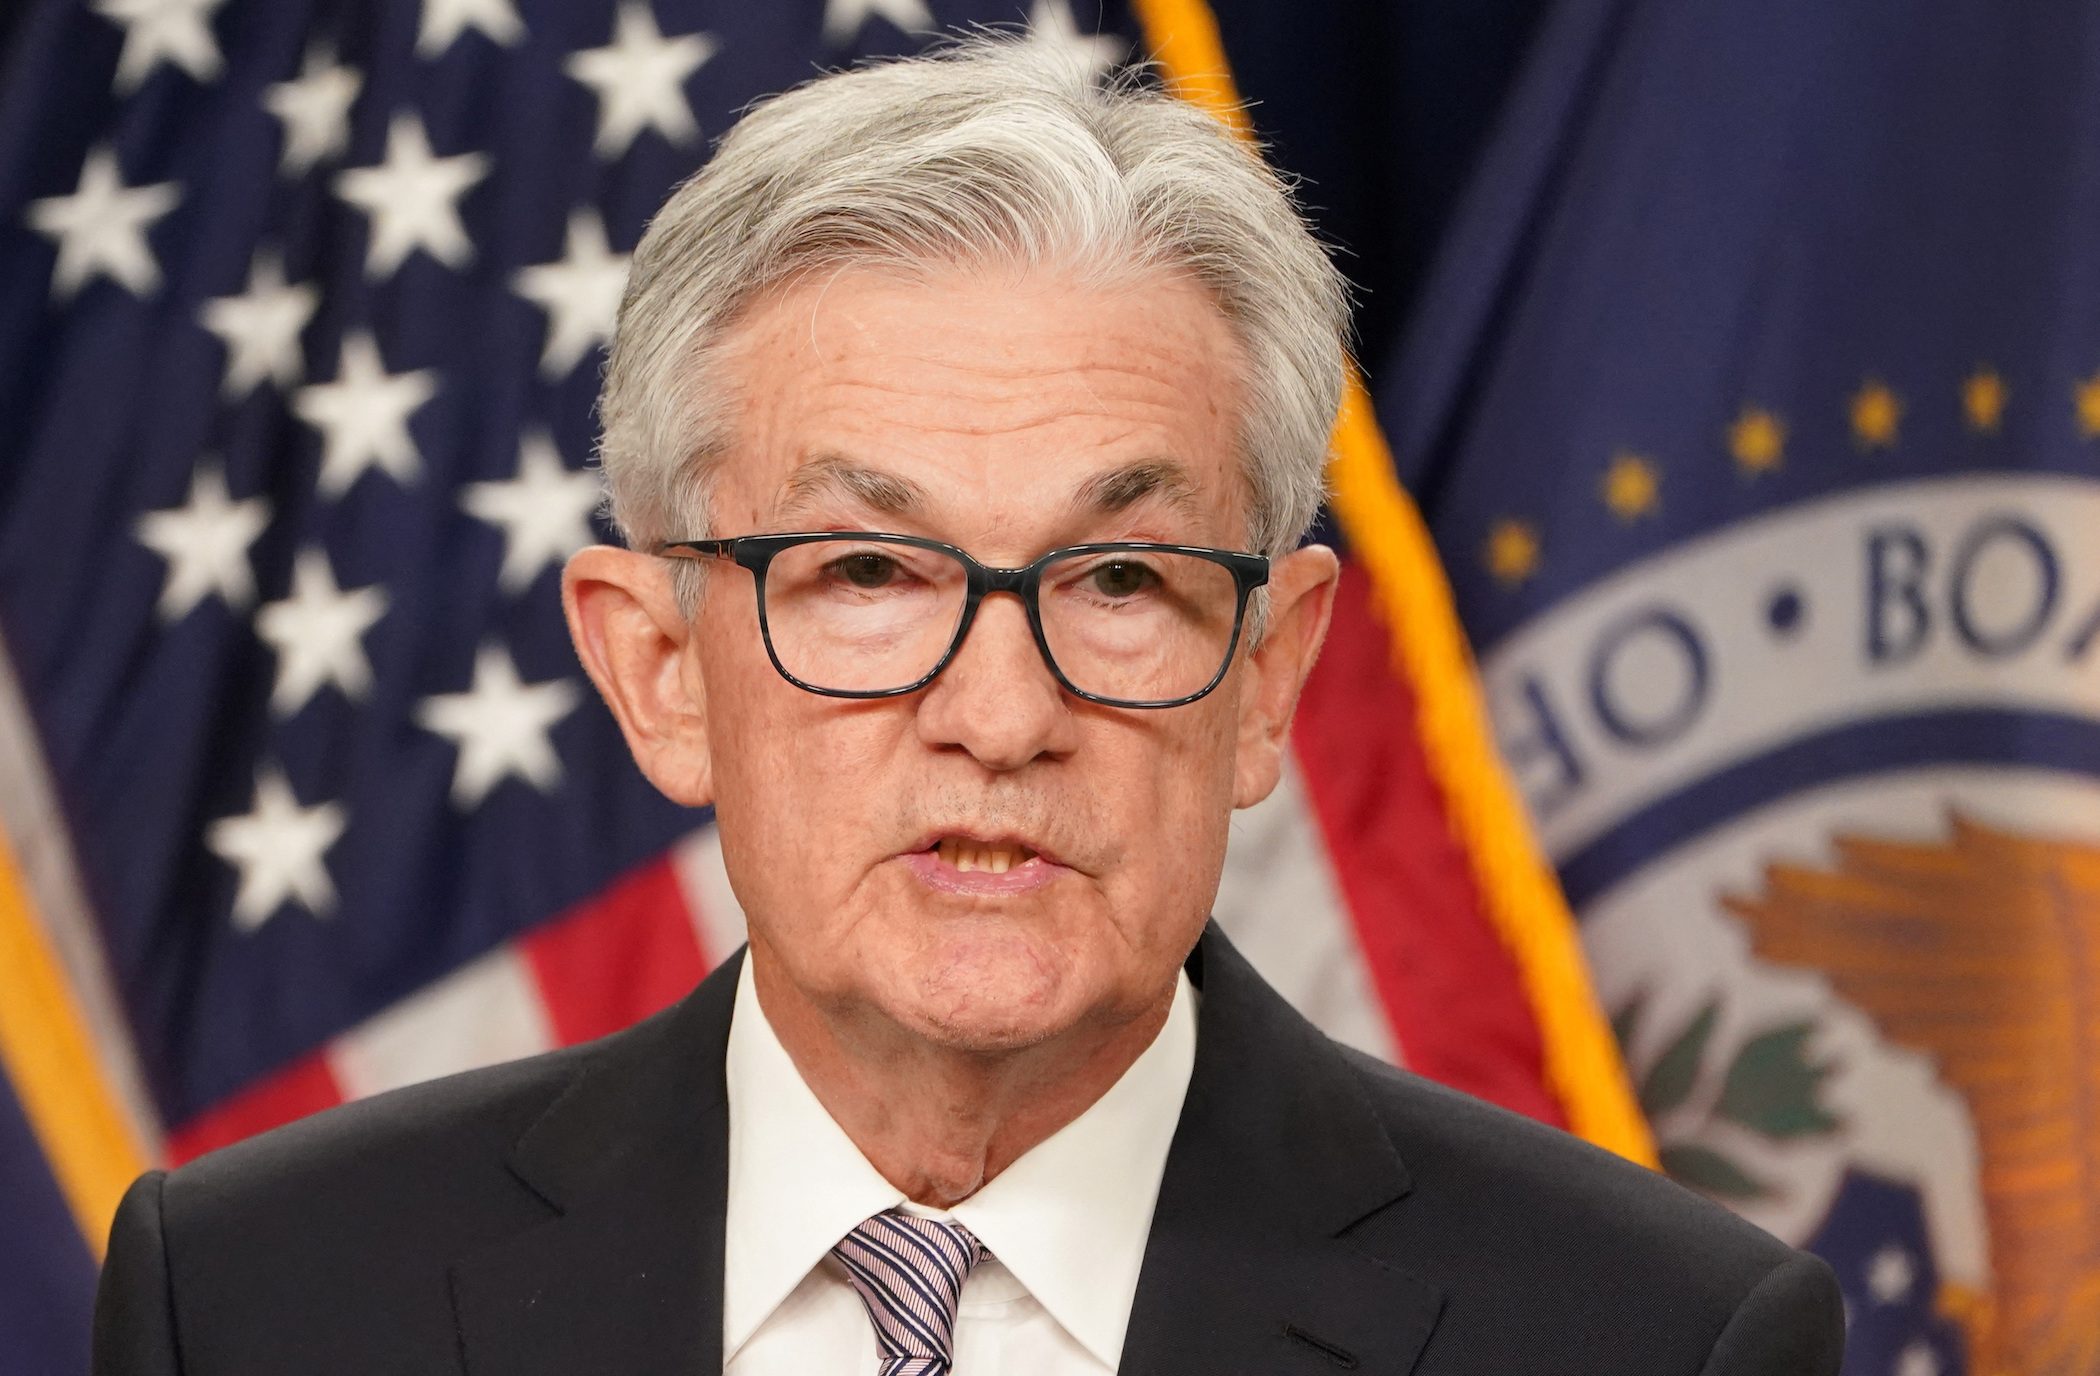 Fed’s Powell says risks more balanced, June policy decision unclear